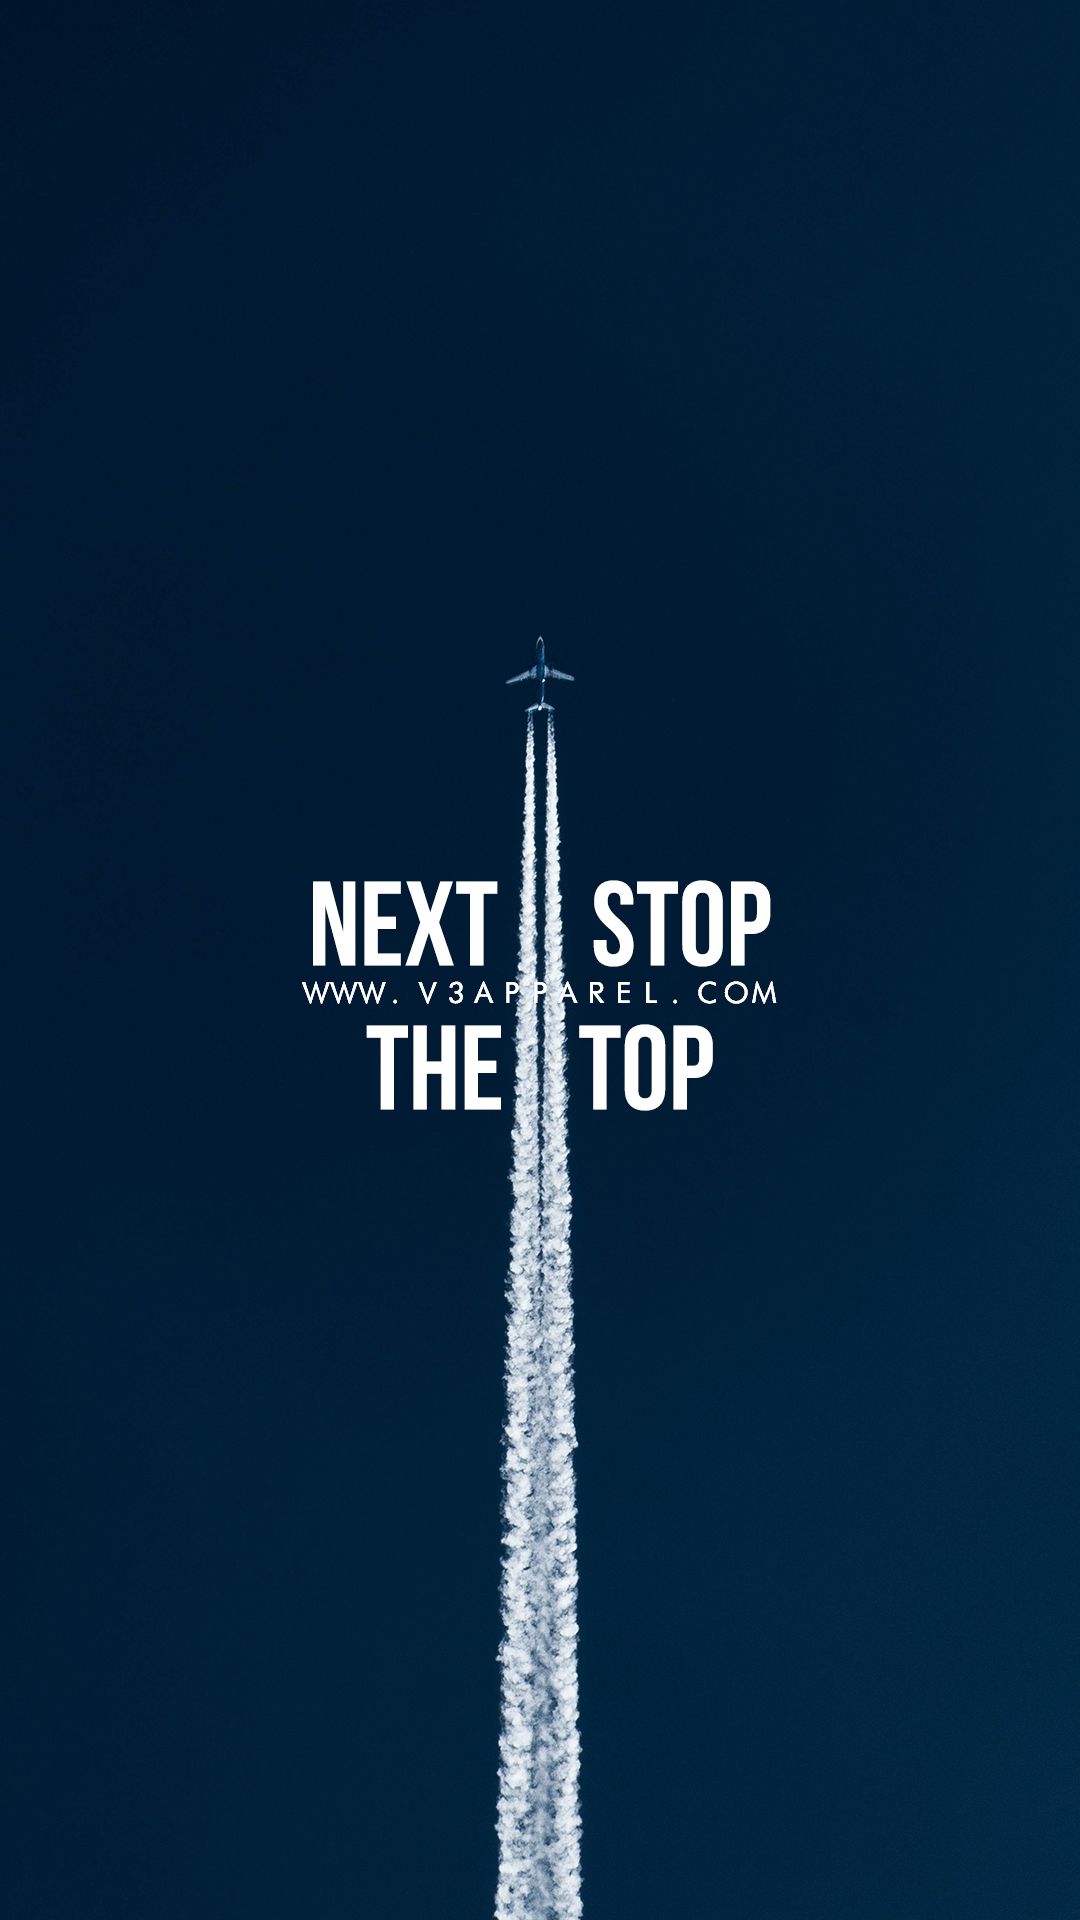 Next stop the top. Download this FREE wallpaper. Motivational quotes for working out, Work motivational quotes, Fitness motivation quotes inspiration